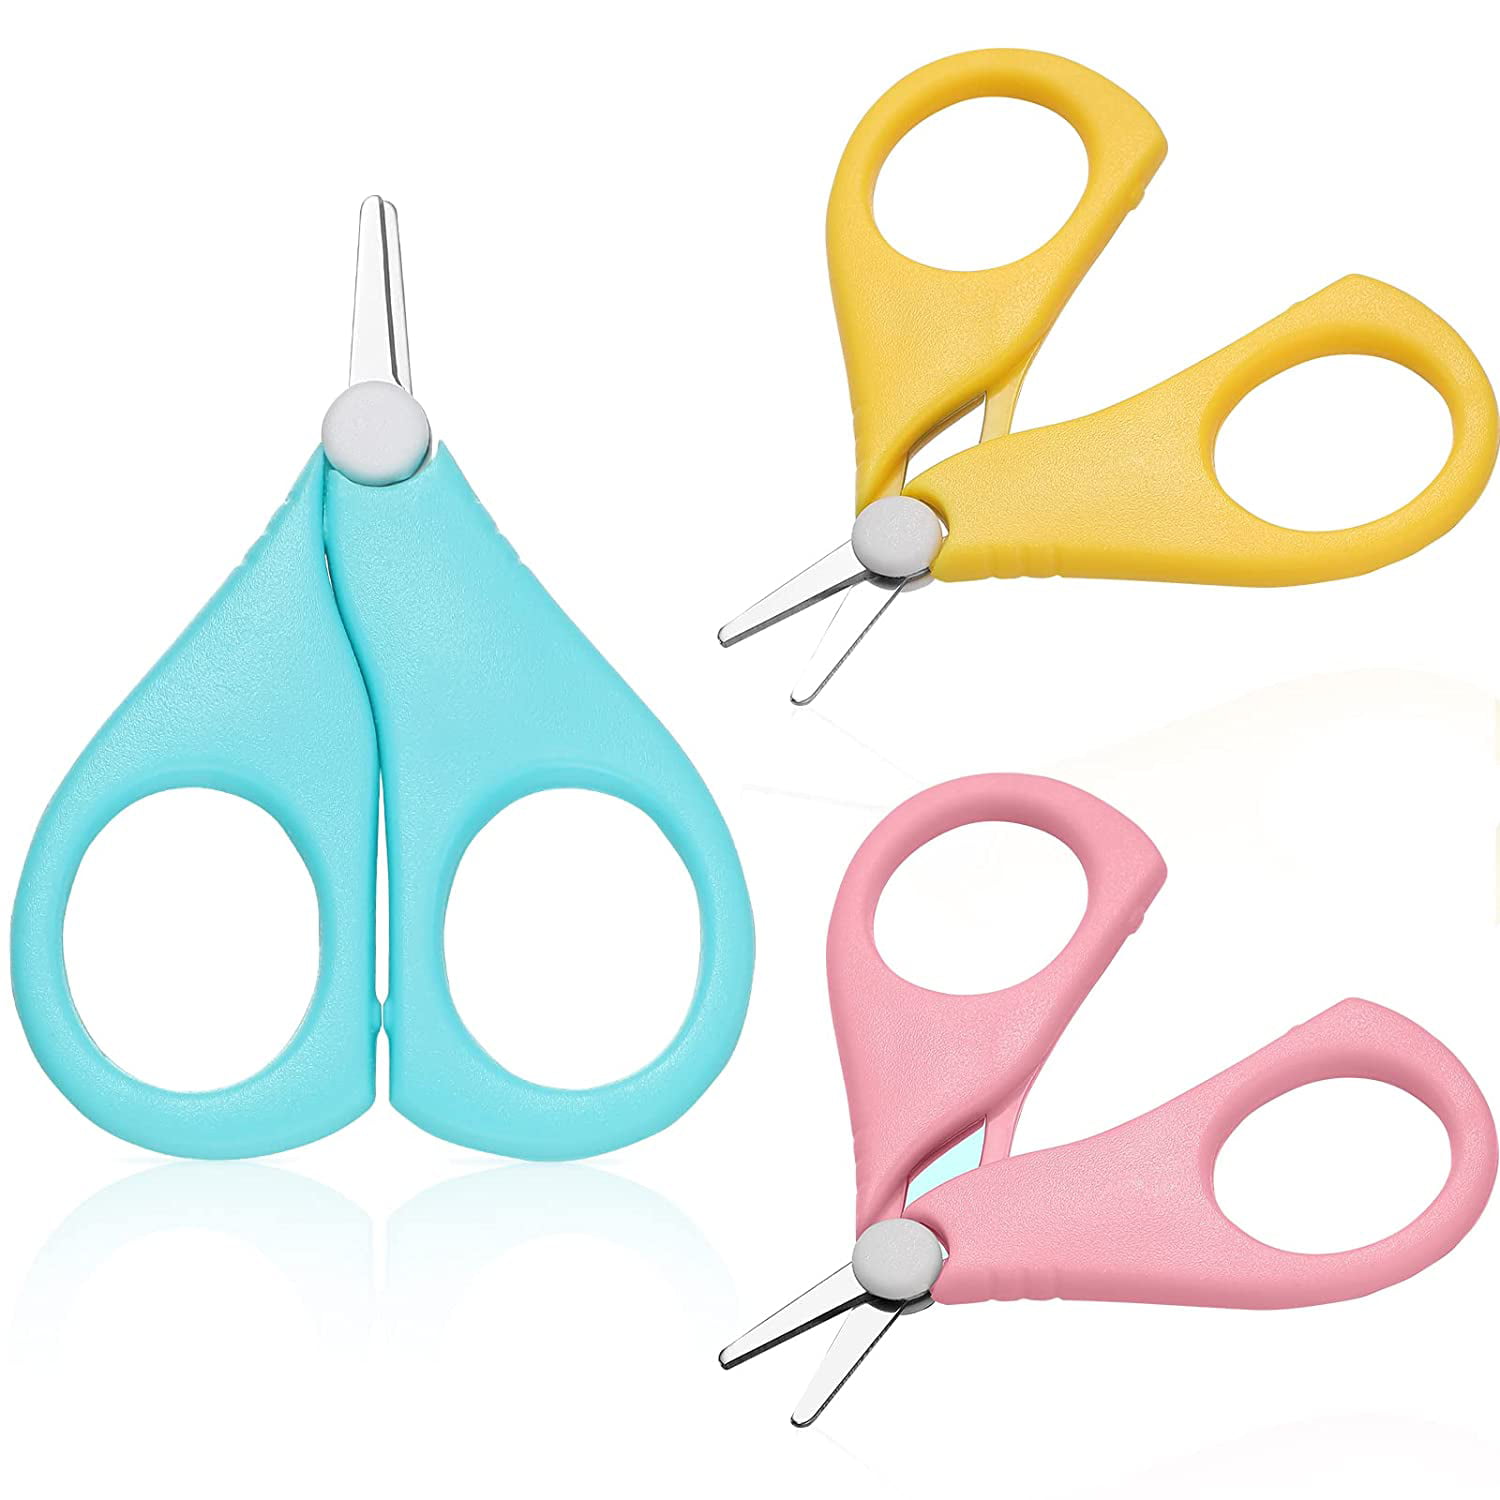 Fisher-Price Baby Scissors & Nail Clipper Set